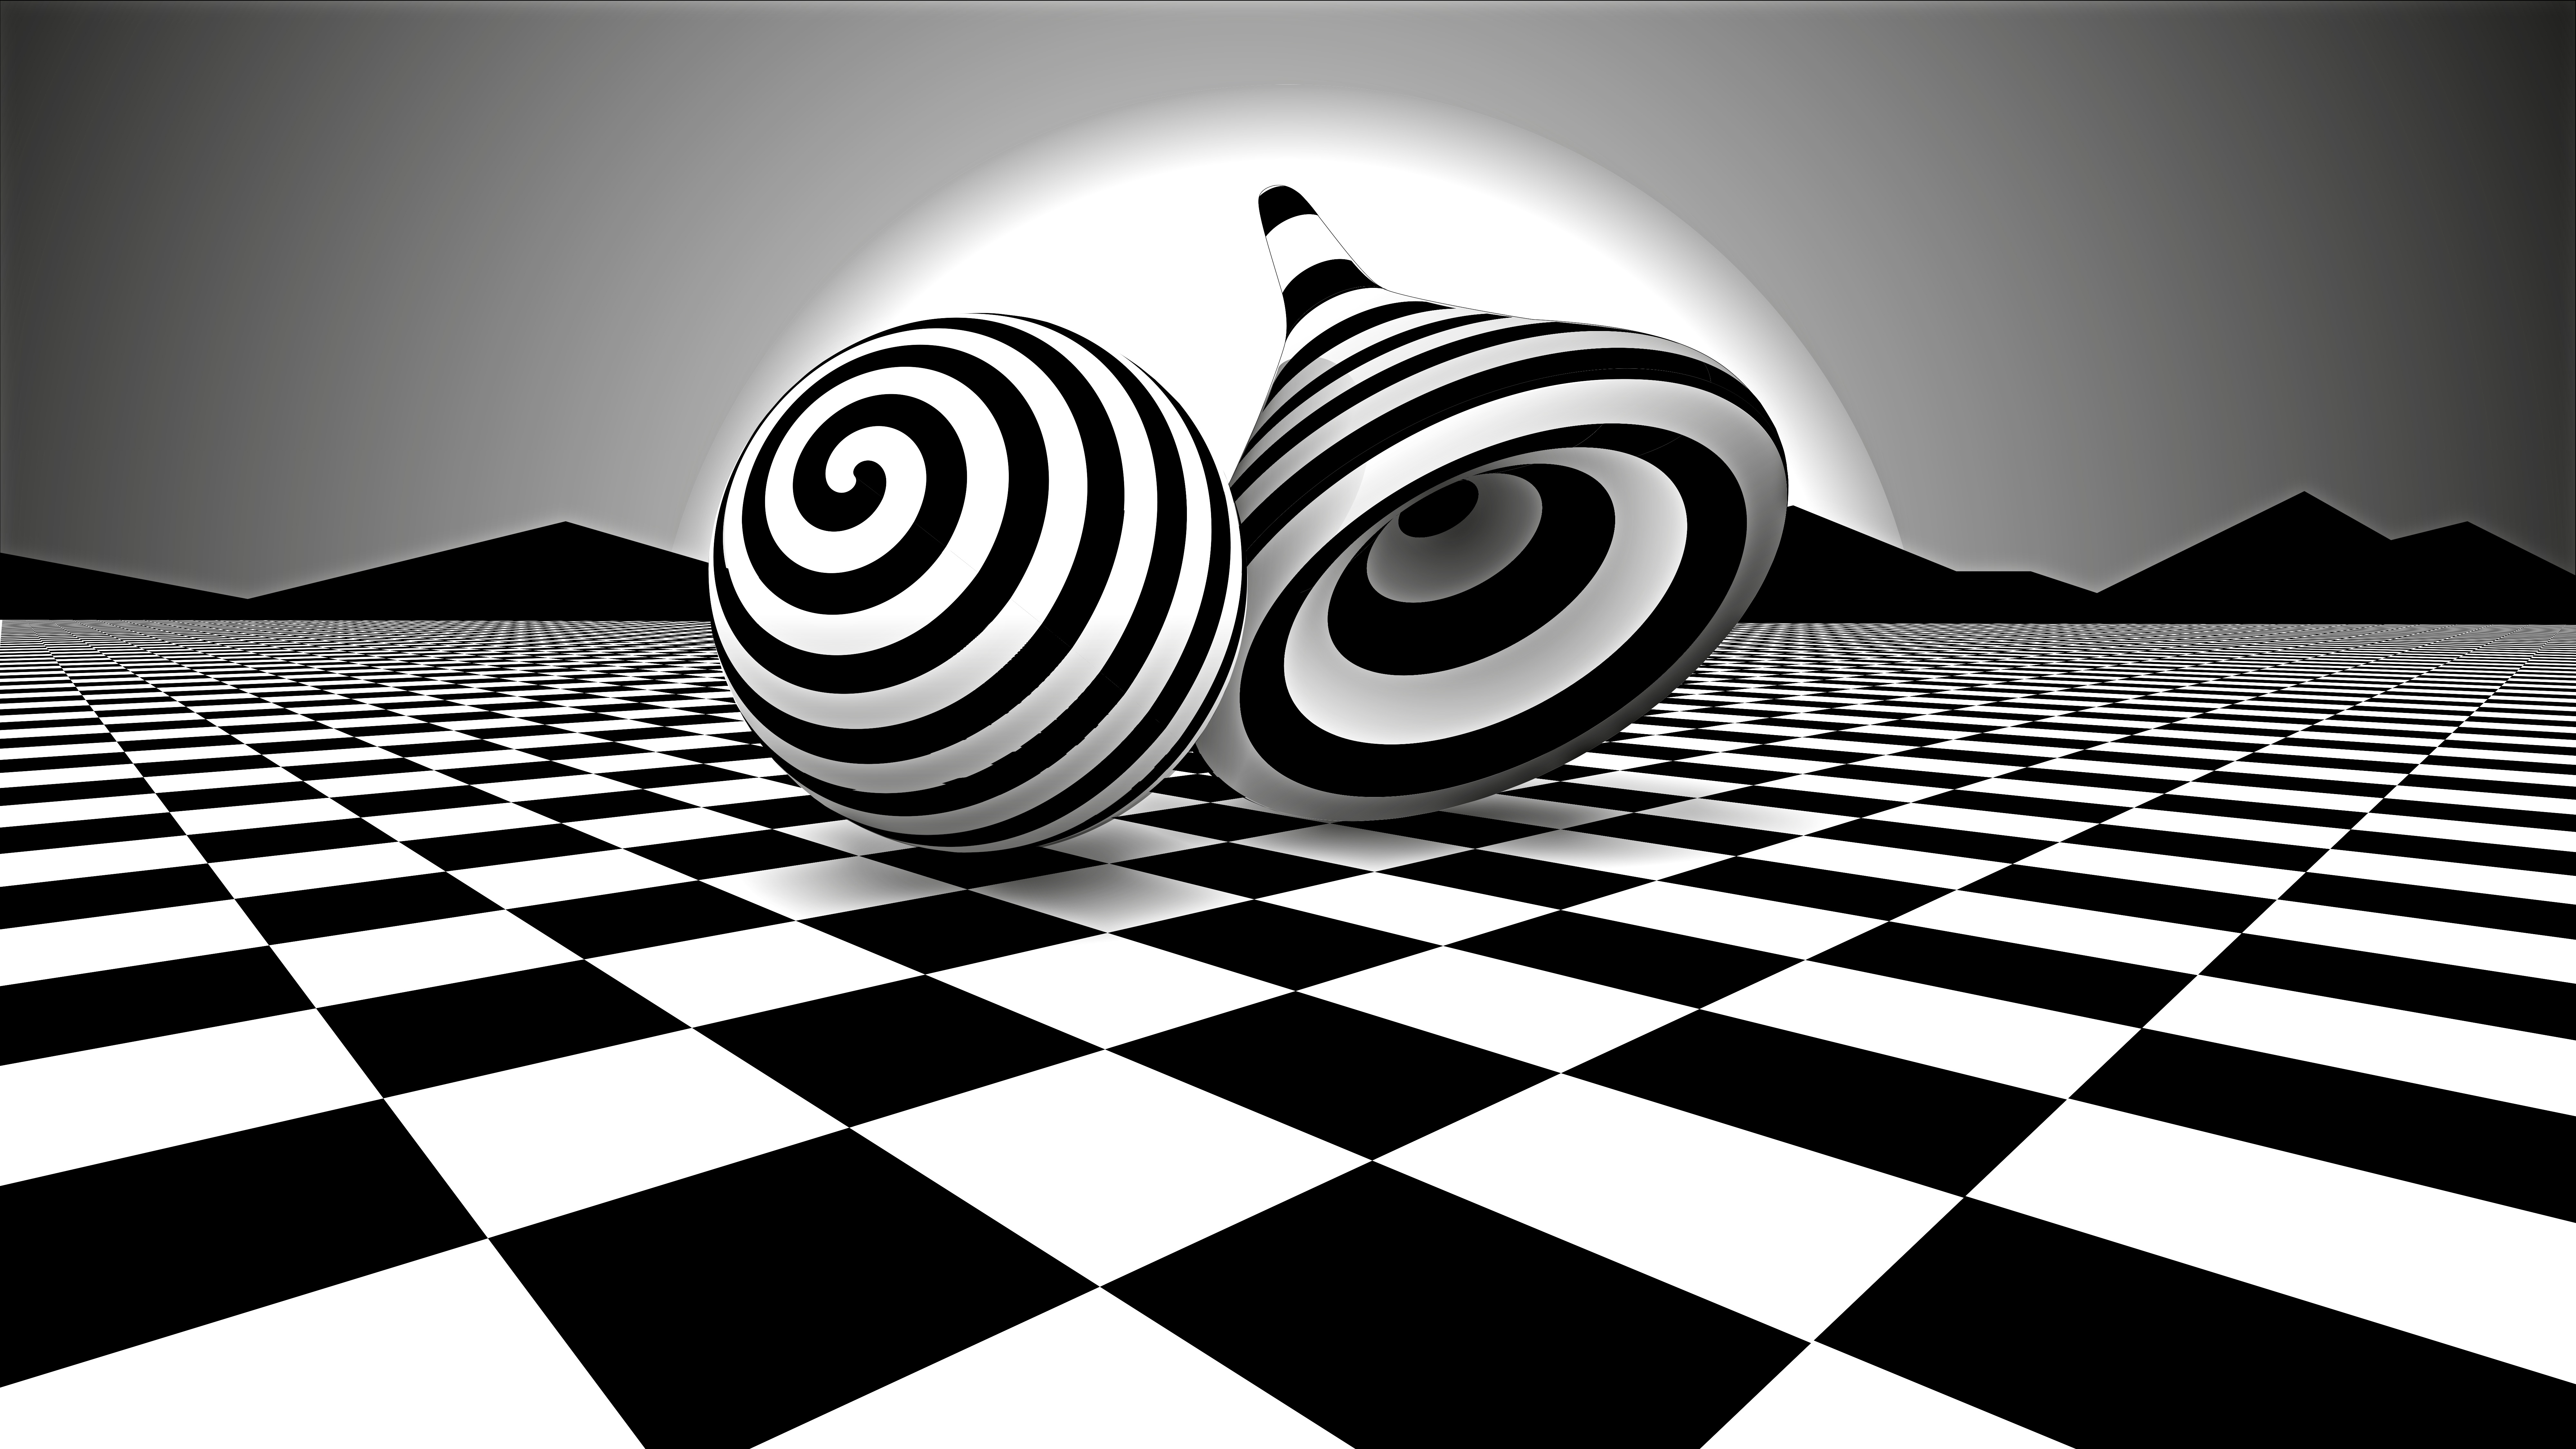 optical illusion wallpaper for walls,black and white,games,indoor games and sports,monochrome photography,photography